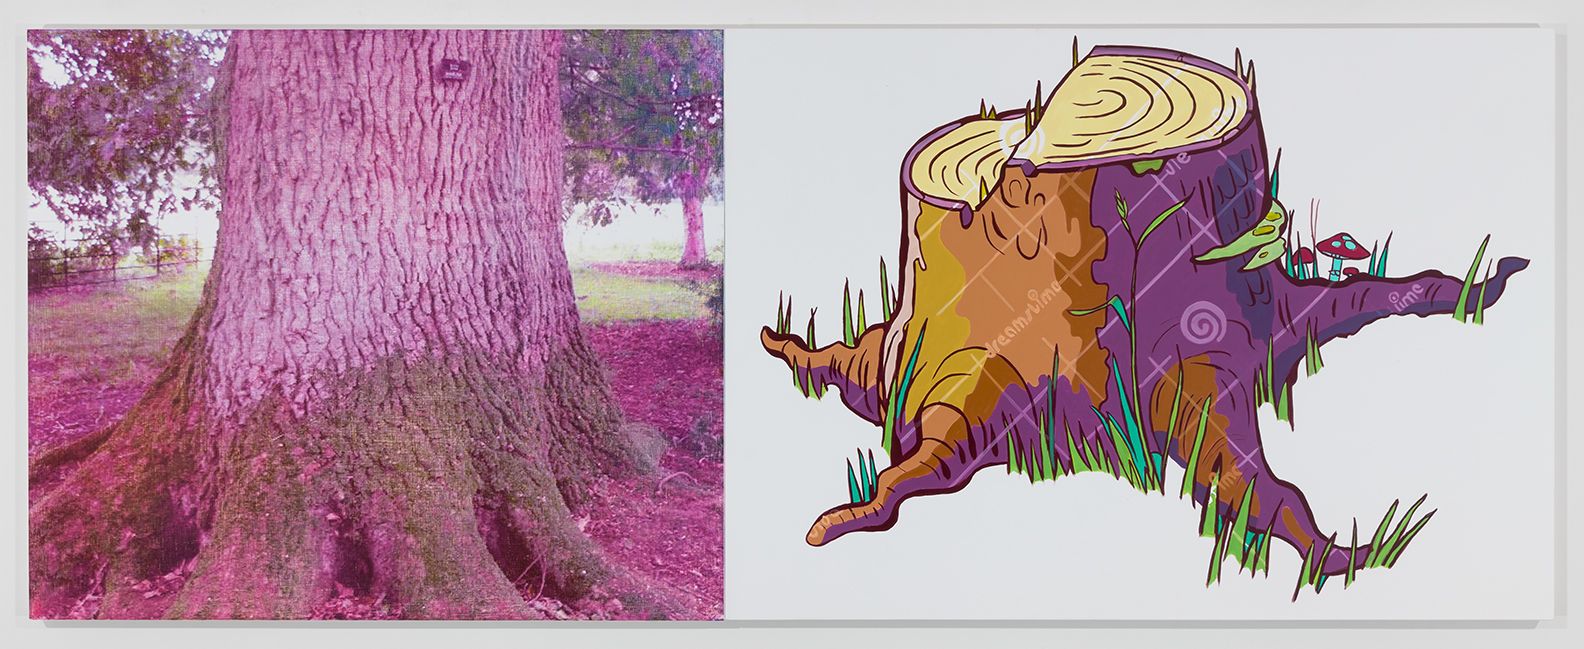 Julia Wachtel, Tree, 2016, oil and acrylic on canvas, 2 panels, overall: 36 x 93 in.  